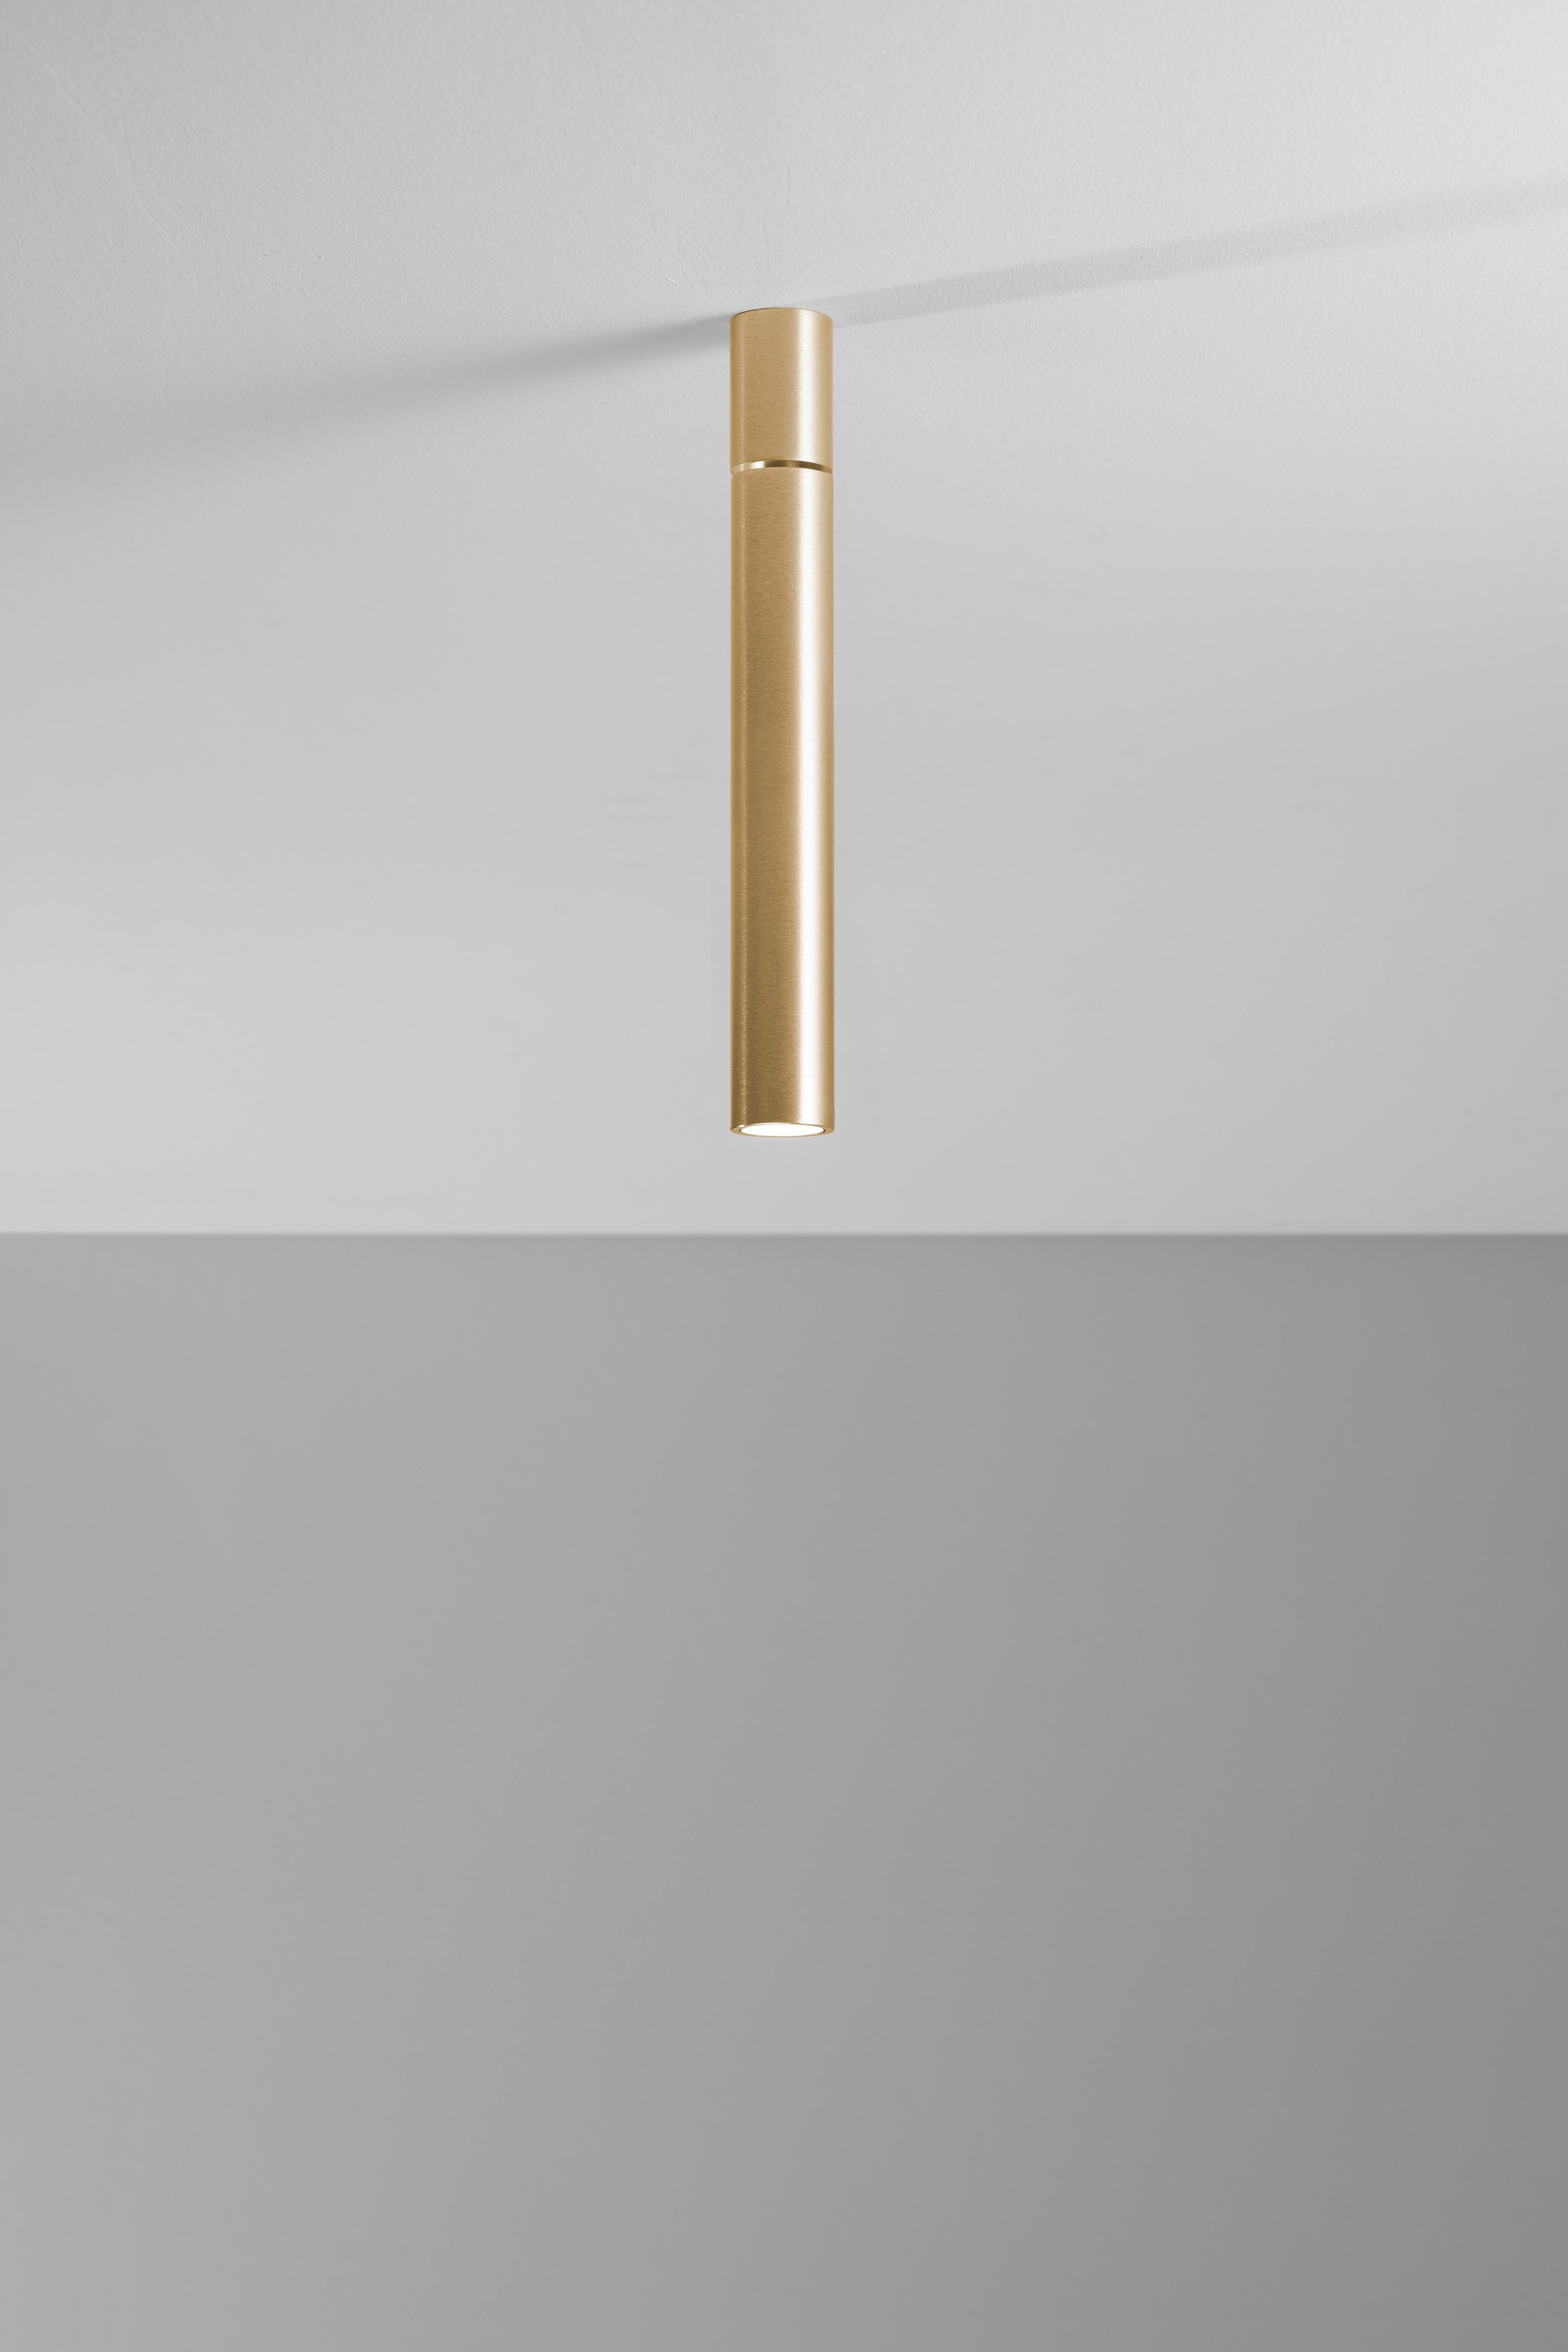 Axolight Ego P Small Flush Mount Ceiling Lamp in Natural Brass by Axolight Lab

Realized entirely from natural brass, it is synthesis of elegance and personality.
The perfection of the lenses used generates a highly impressive and unexpected beam of